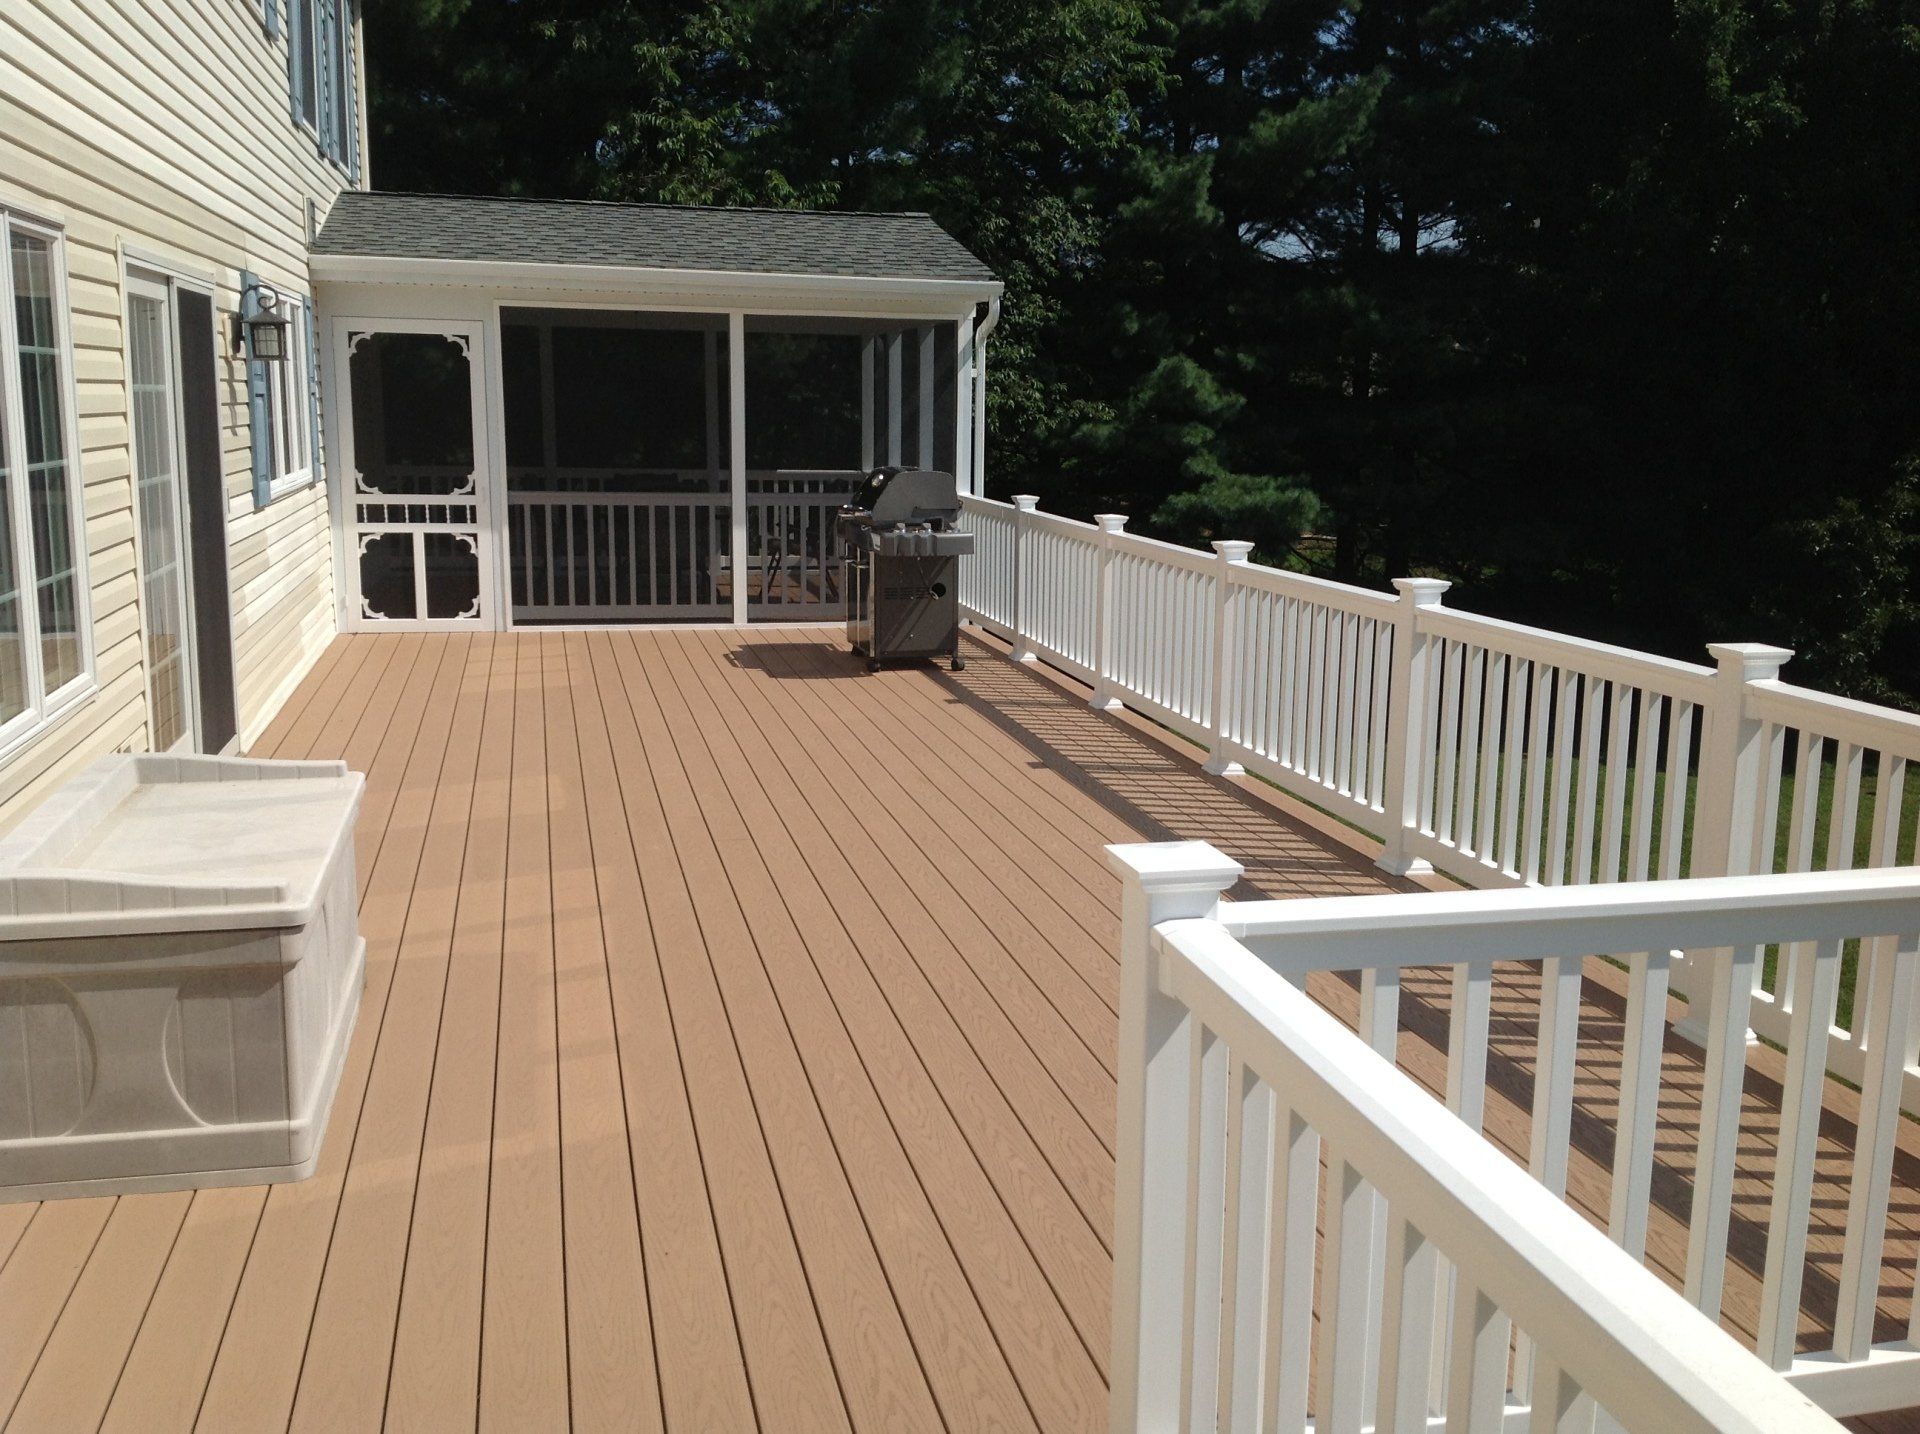 Terrace with wooden Floor - Home Improvement Services in Glen Arm, MD